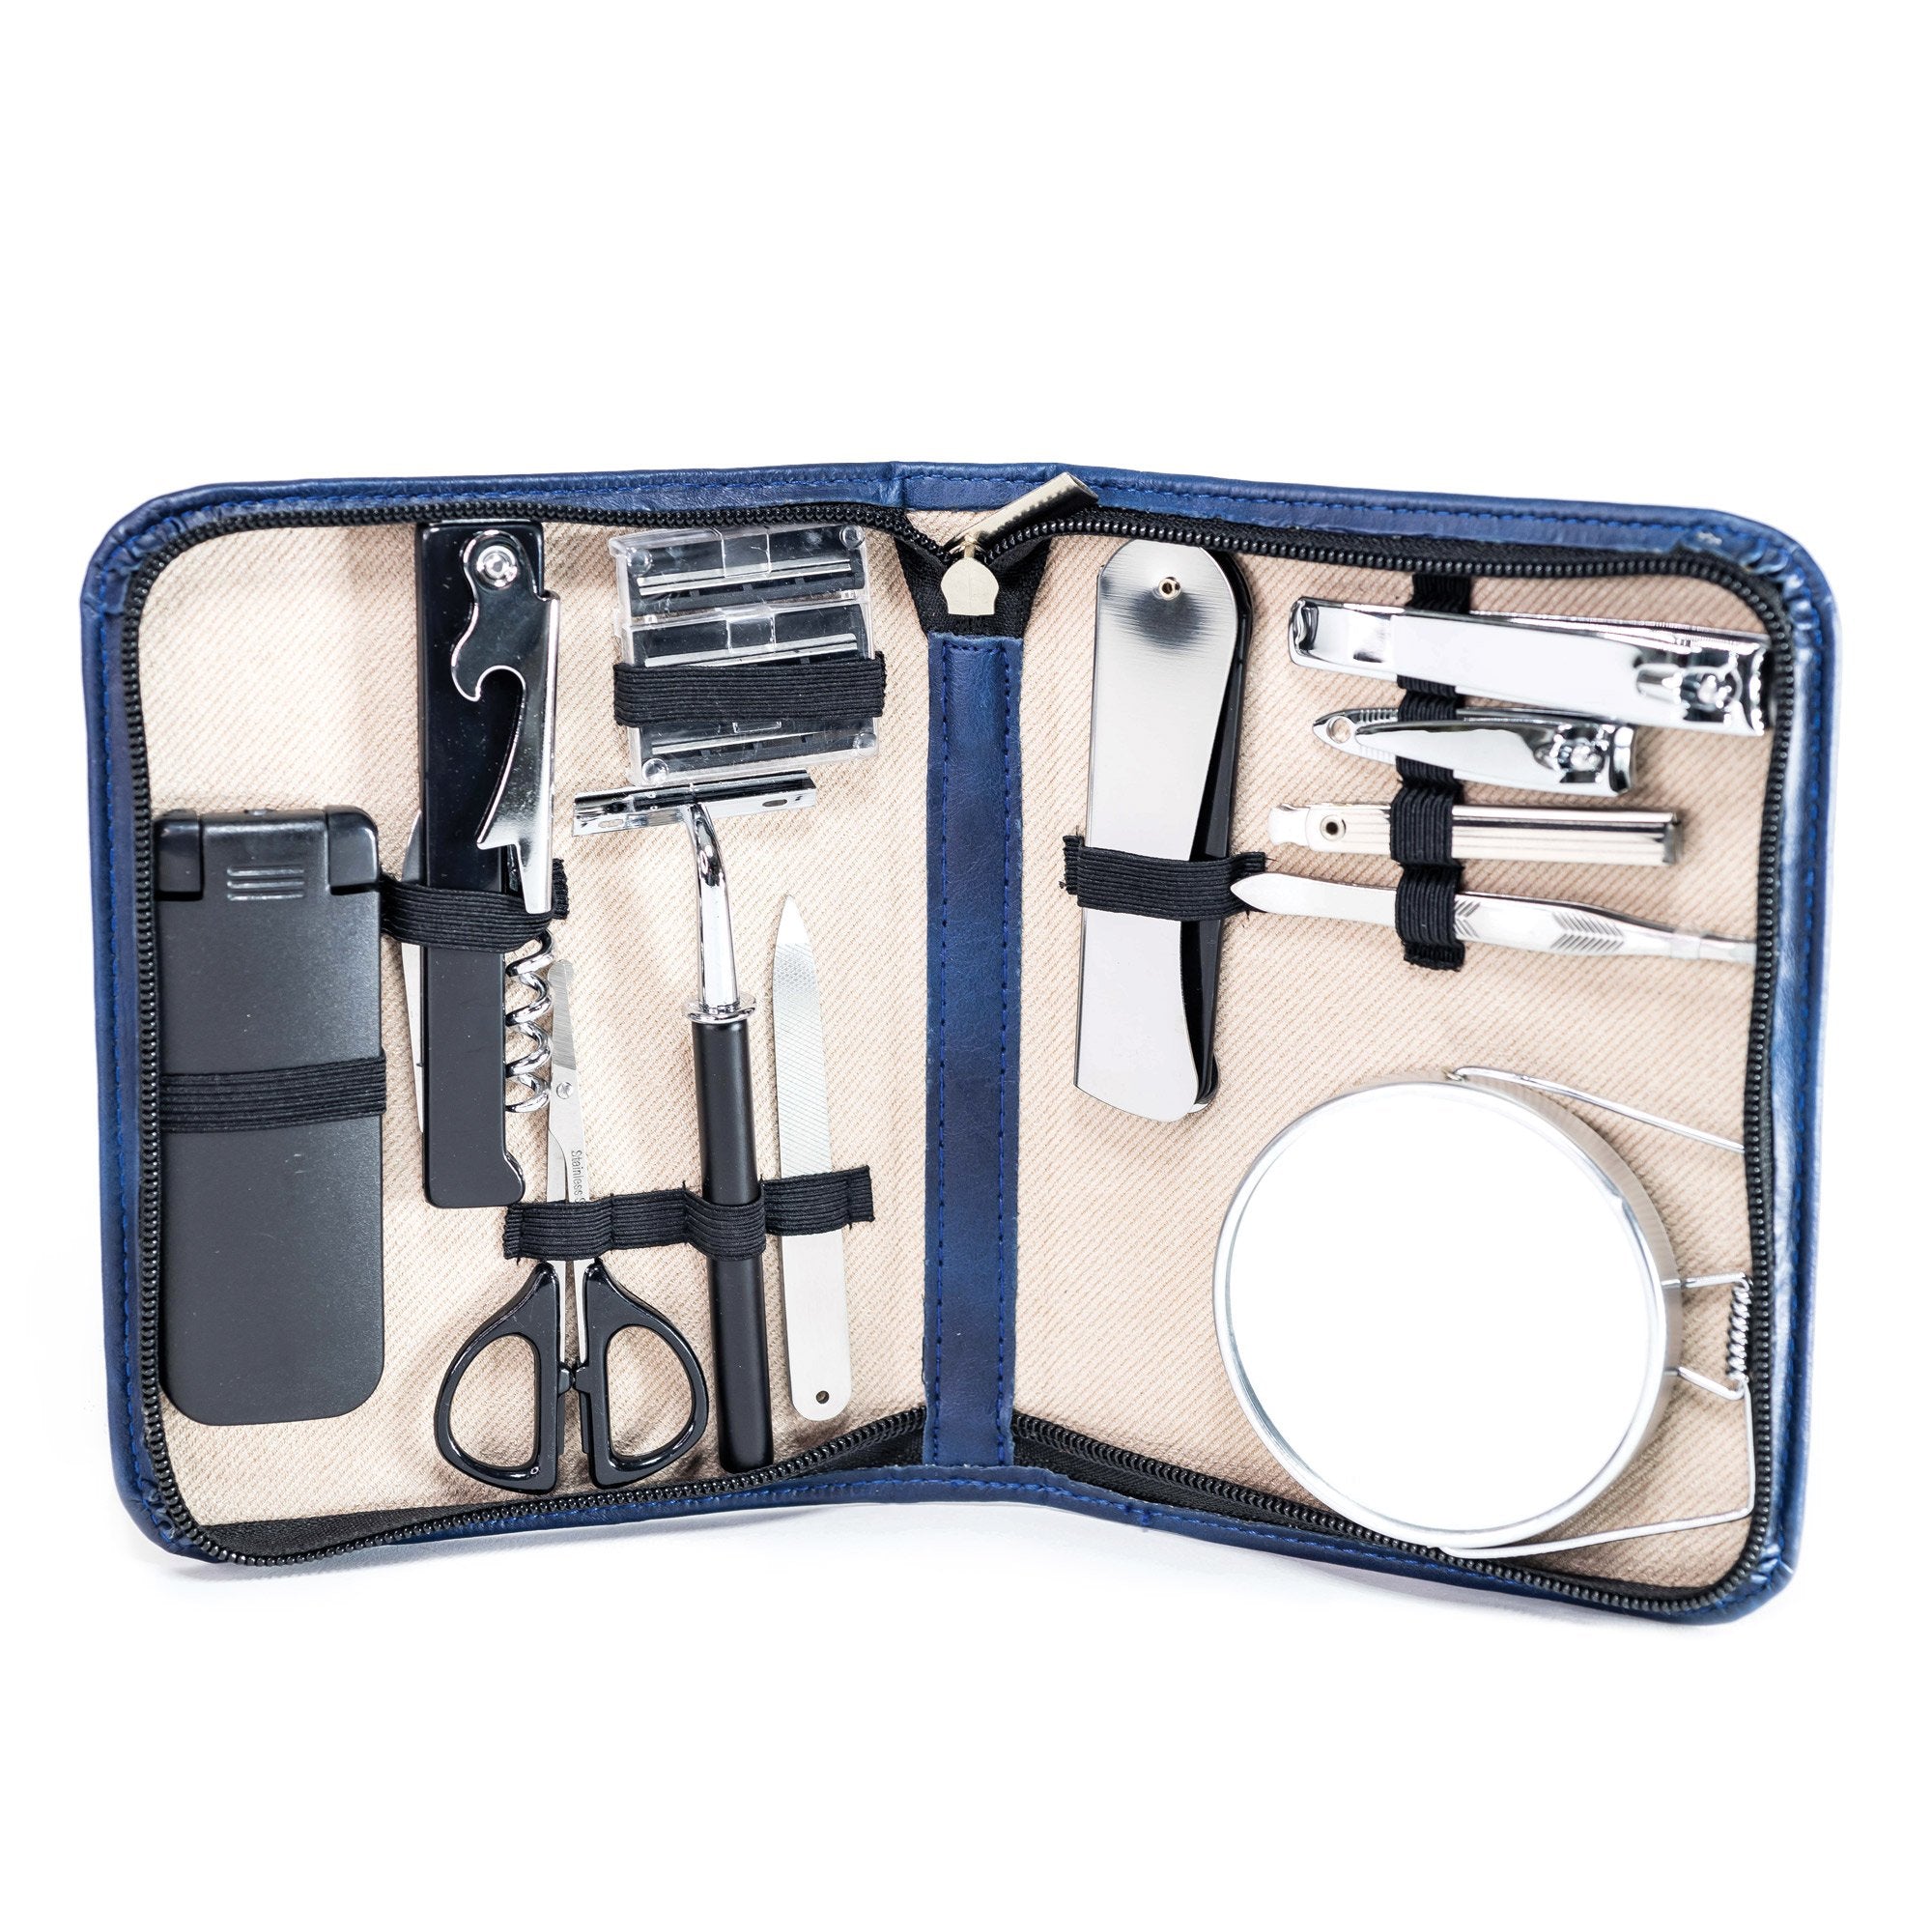 Mr. On the Move Grooming Kit